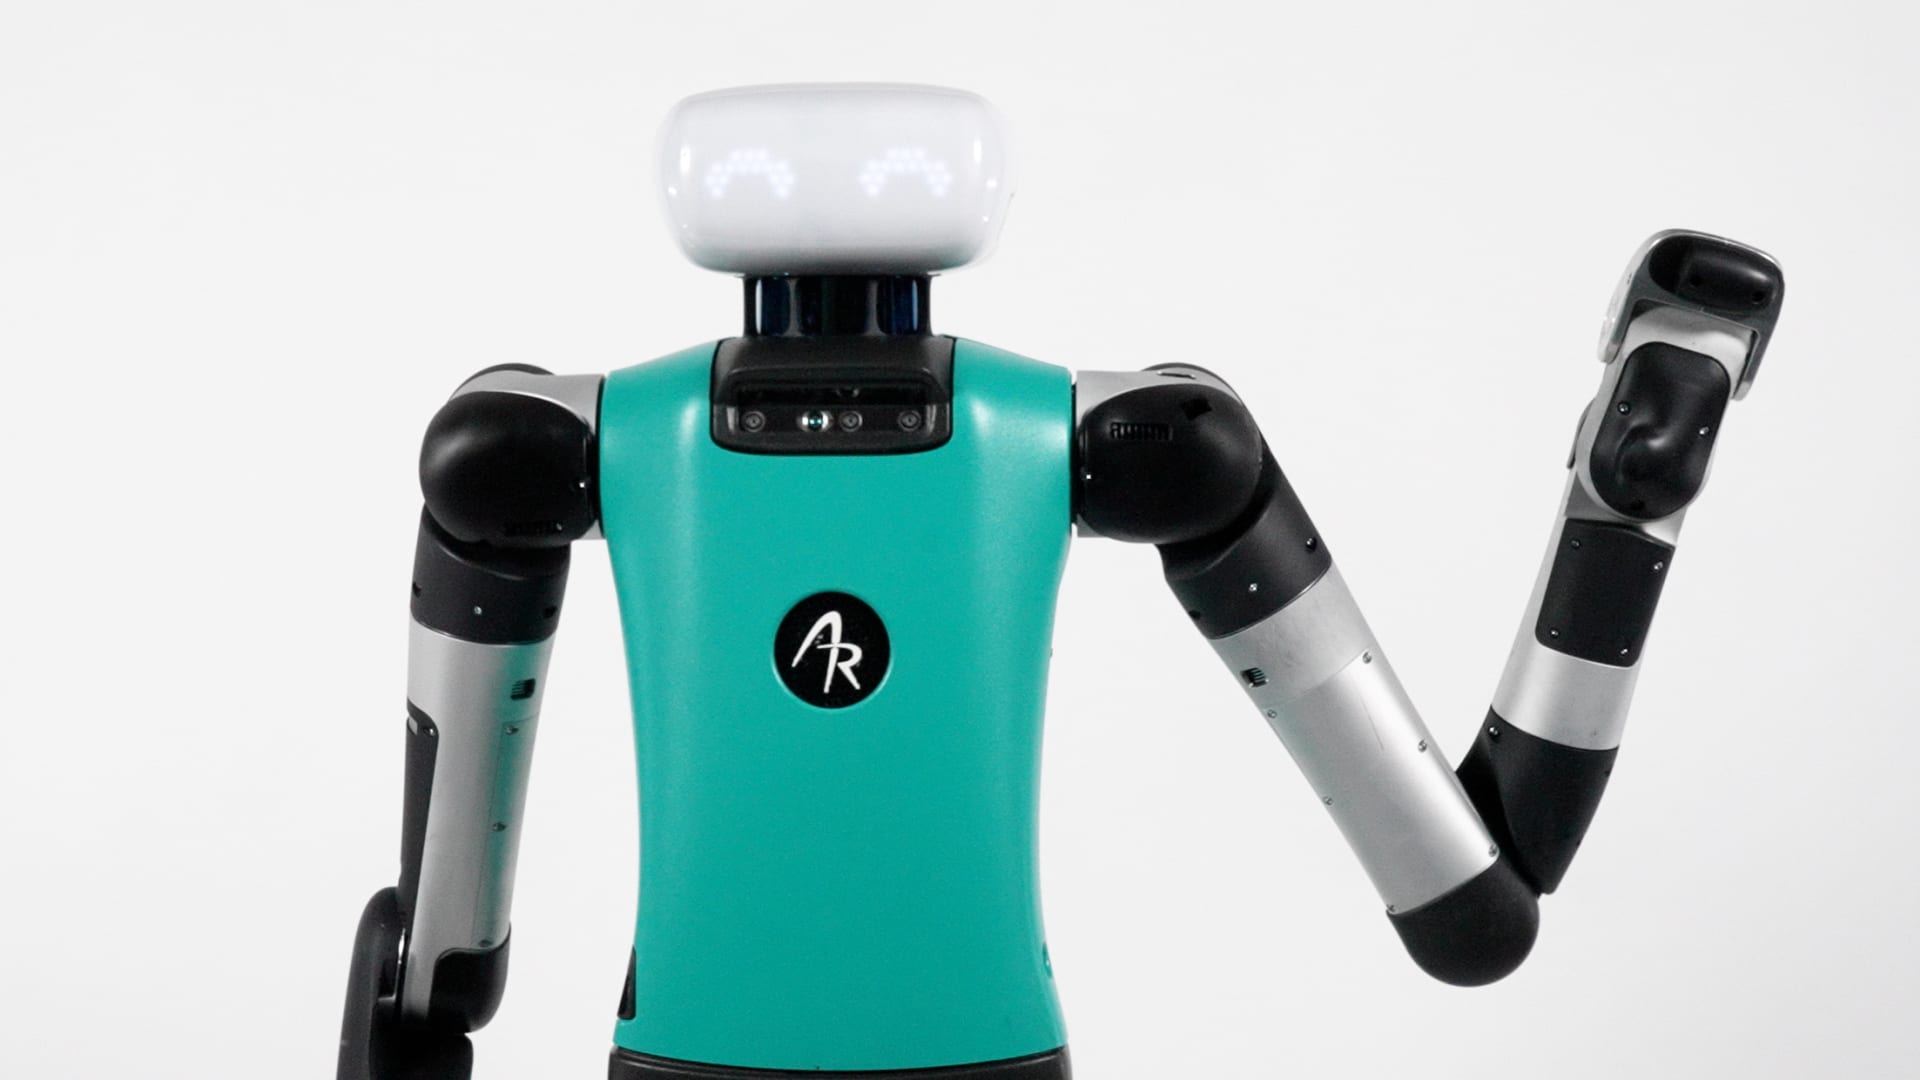 Agility Robotics is opening a humanoid robot manufacturing unit, beating Tesla to the punch